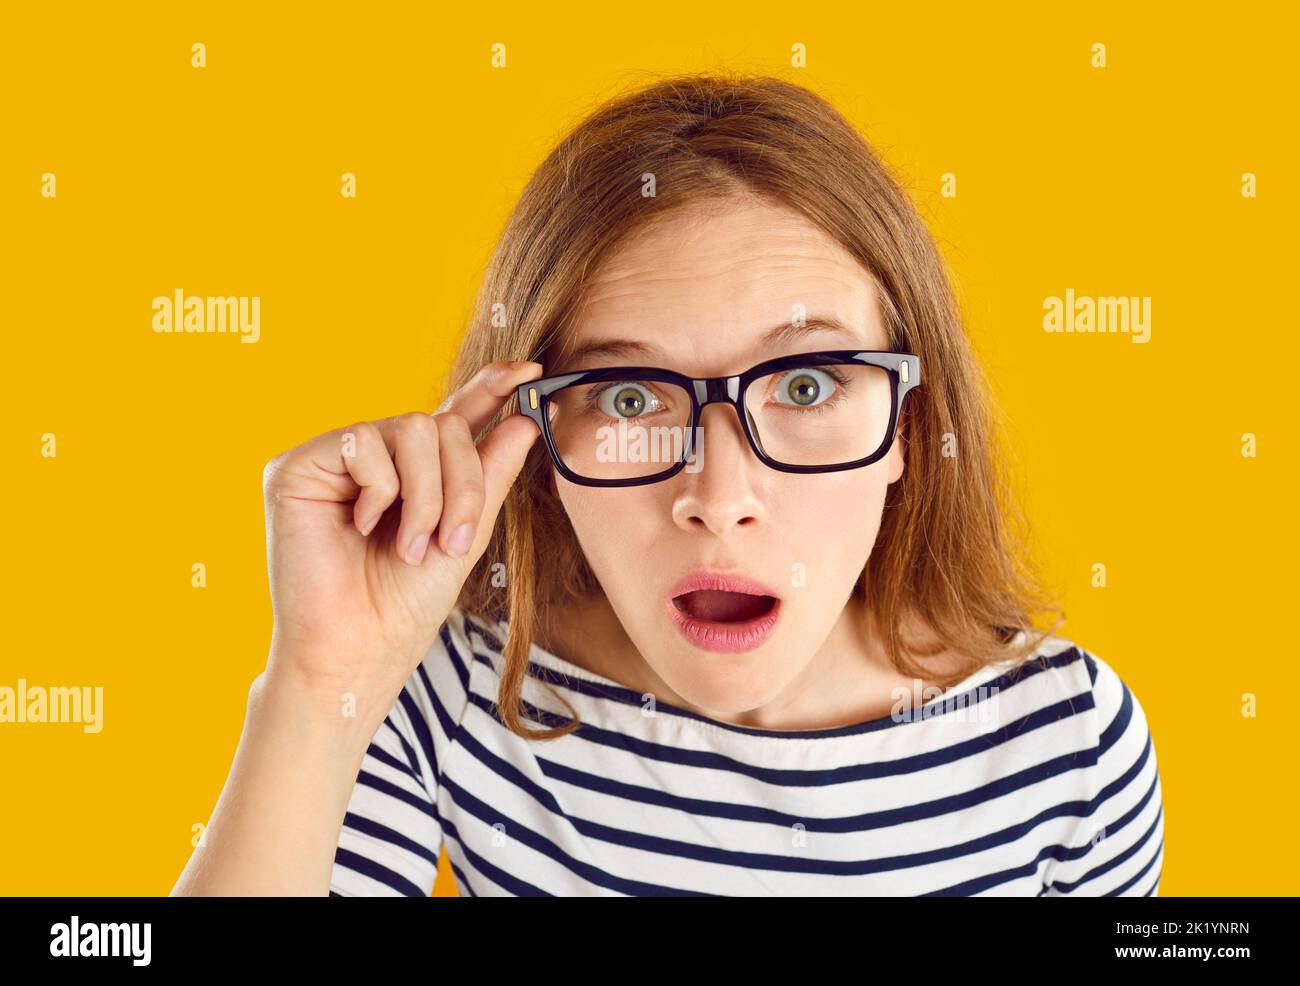 Funny student girl in glasses looking at camera with shocked, astonished face expression Stock Photo